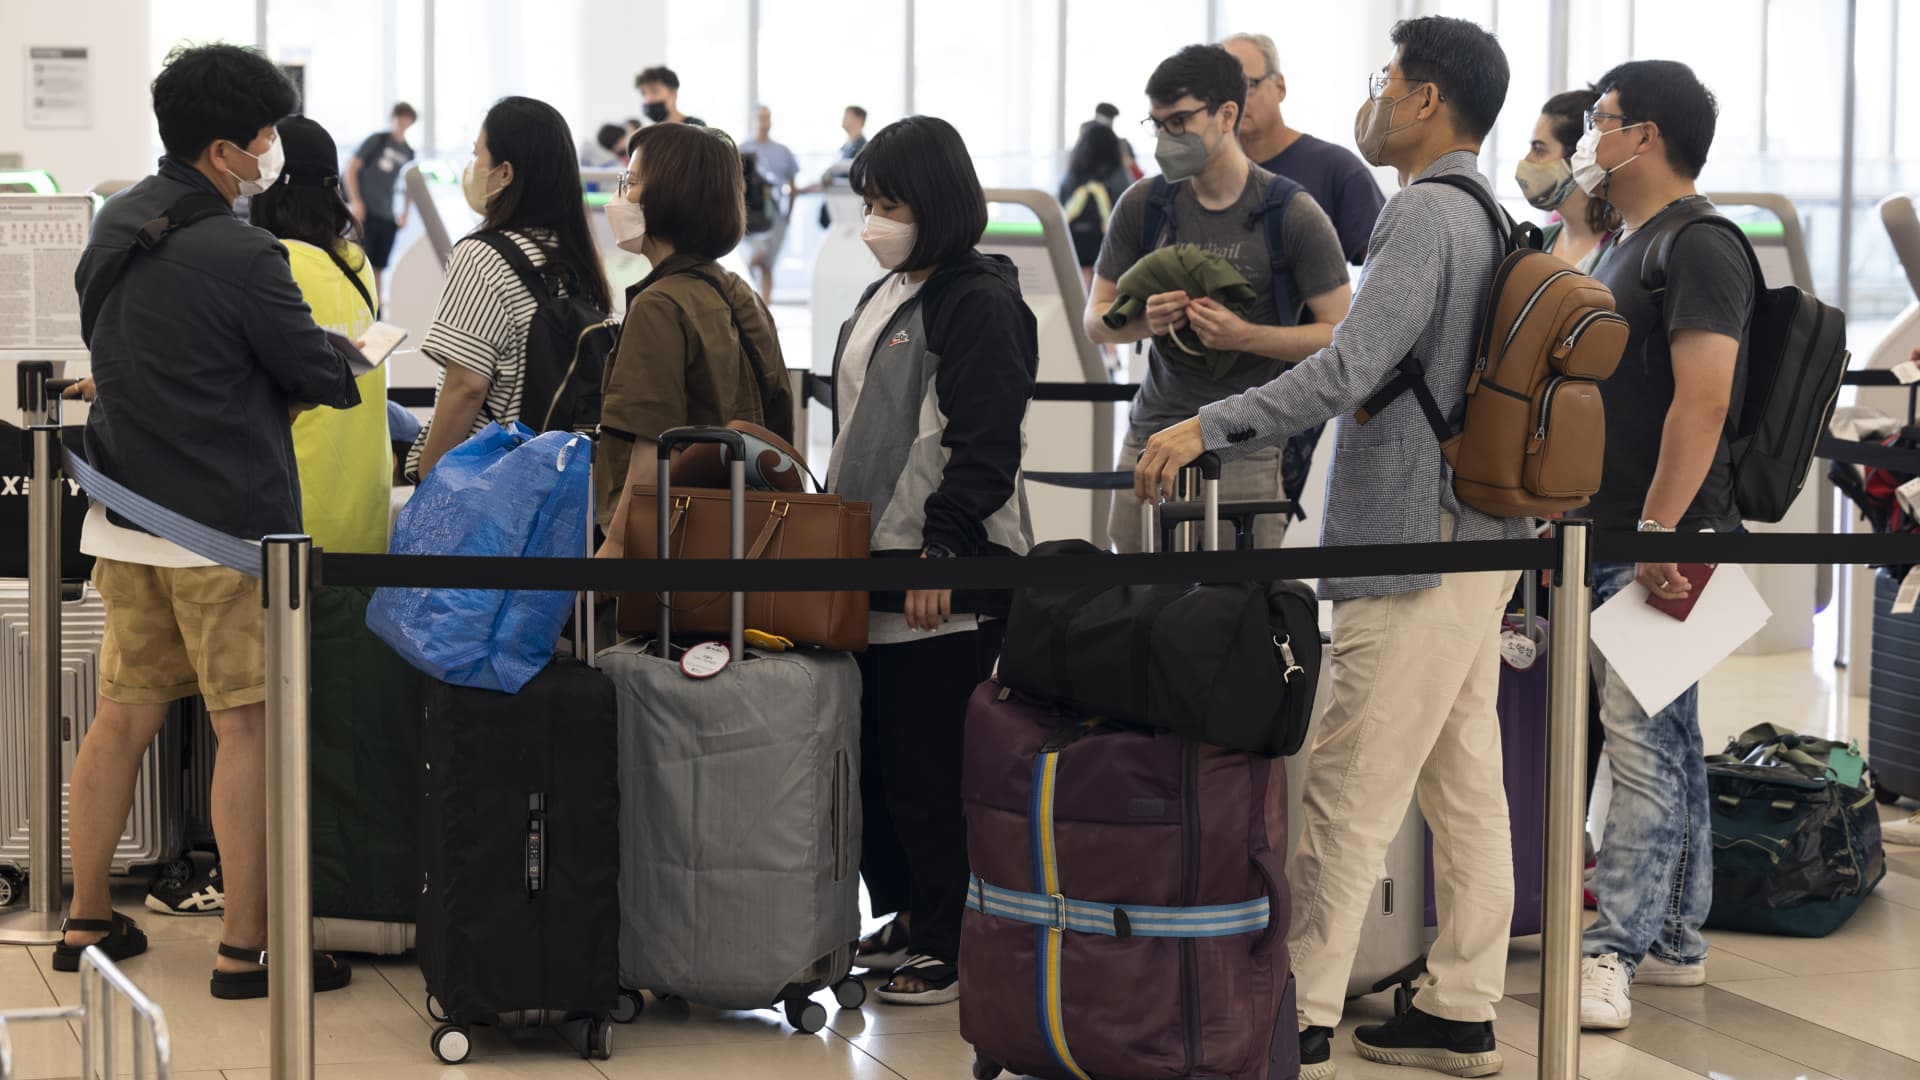 Air travel complaints nearly tripled in May from same month in 2019, before the pandemic